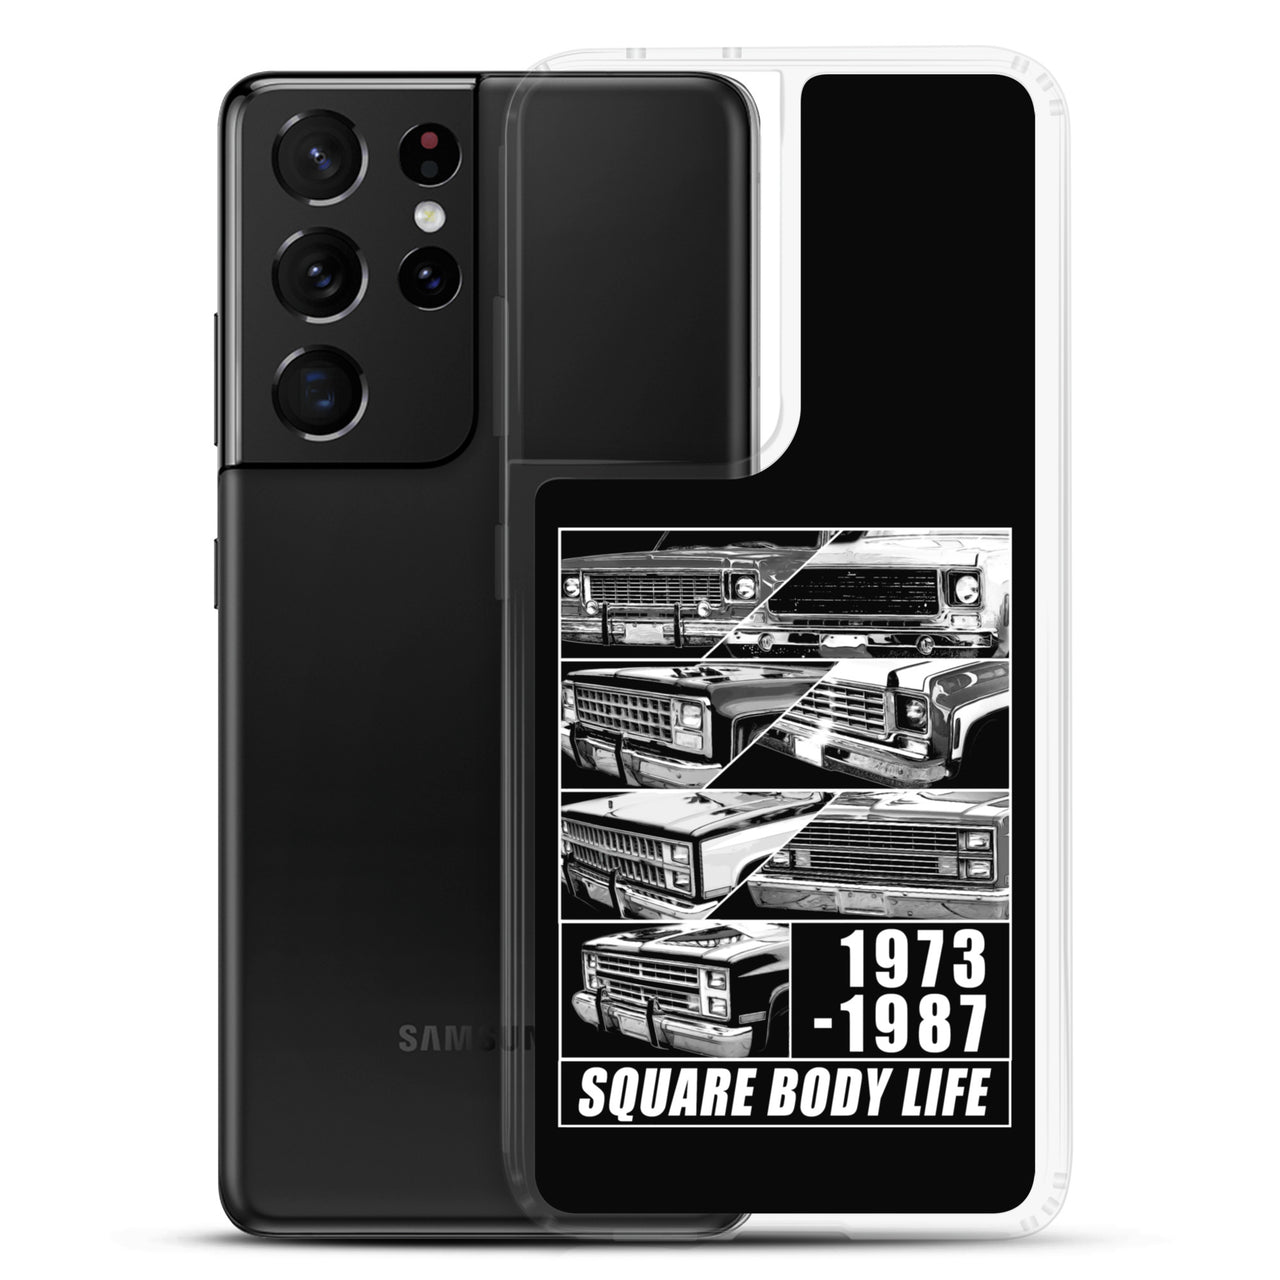 Squarebody Truck Samsung Phone Case For S20 Ultra